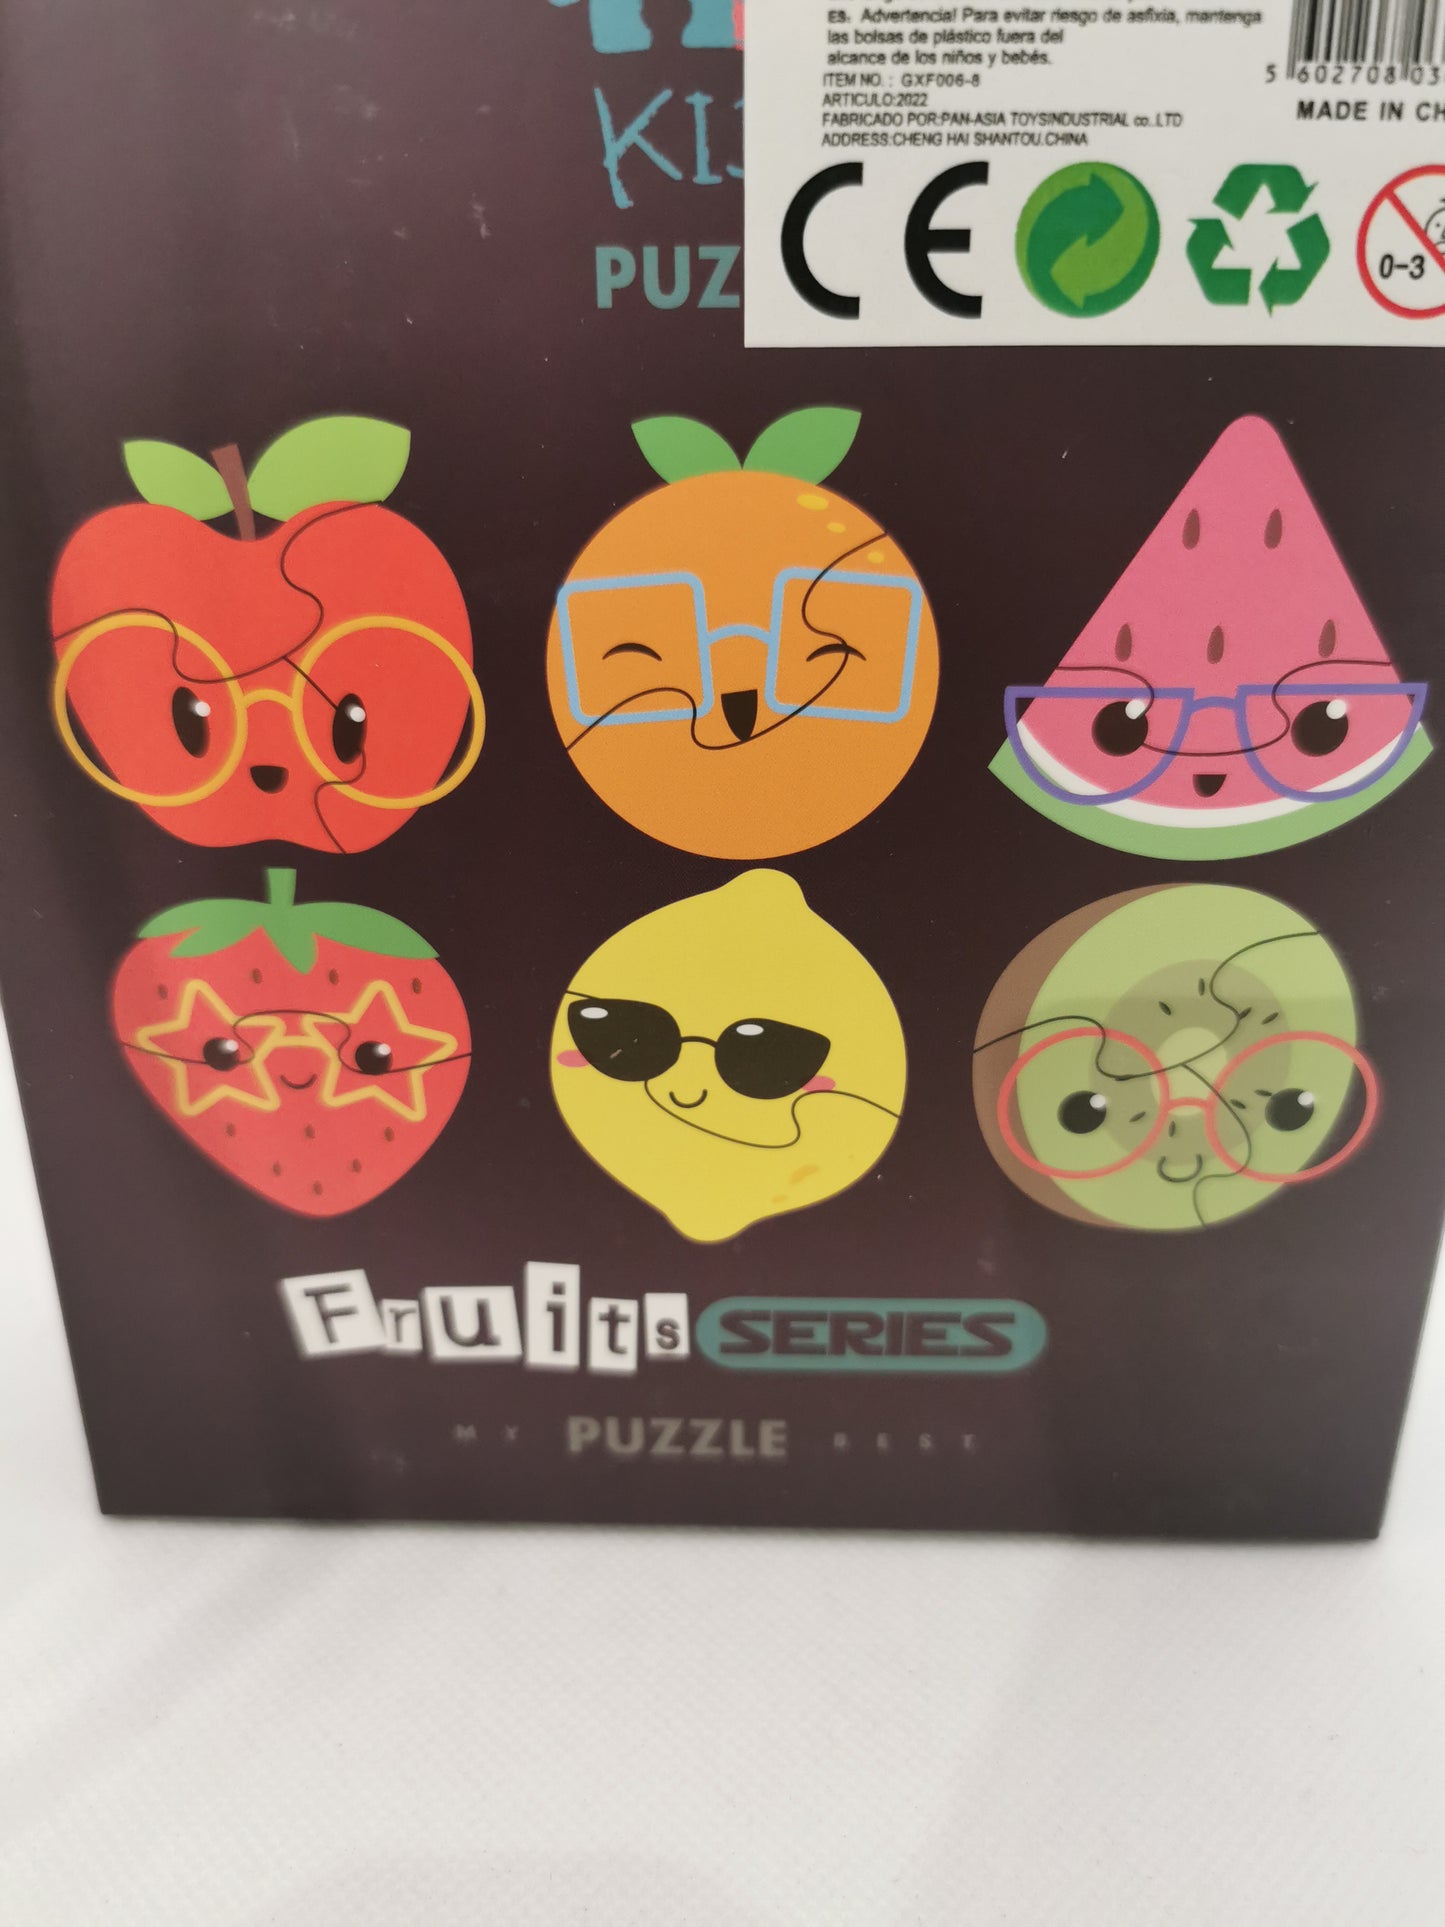 Kids Puzzle Fruit Series 6 in a Box